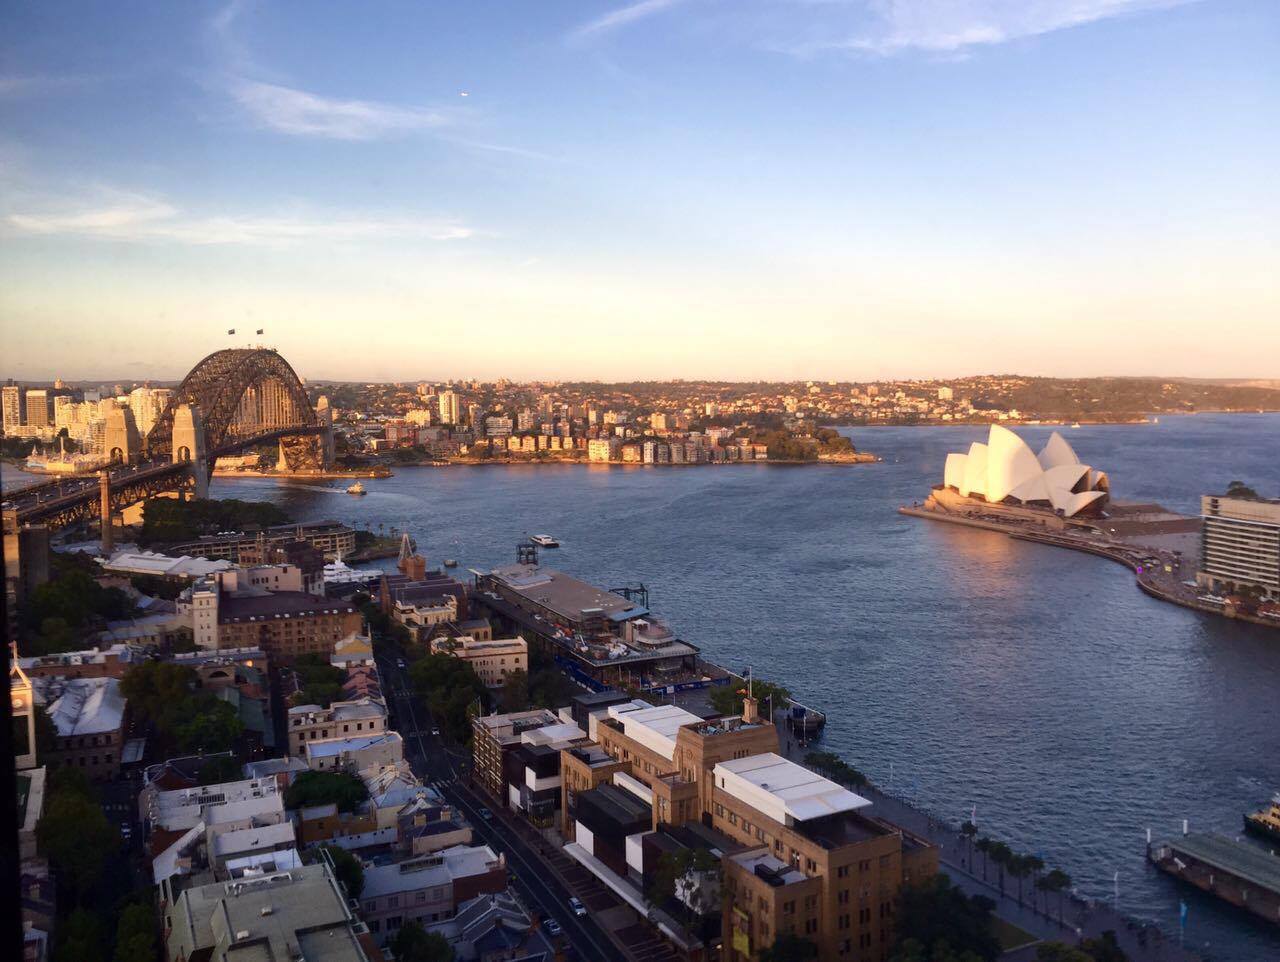  No shot of Sydney's skyline is complete without the  Sydney Harbor Bridge  (left), and the  Sydney Opera House.&nbsp; Tourists have the option of climbing the bridge, awarded with panoramic and unparalleled views of the city. Harnesses ensure your s